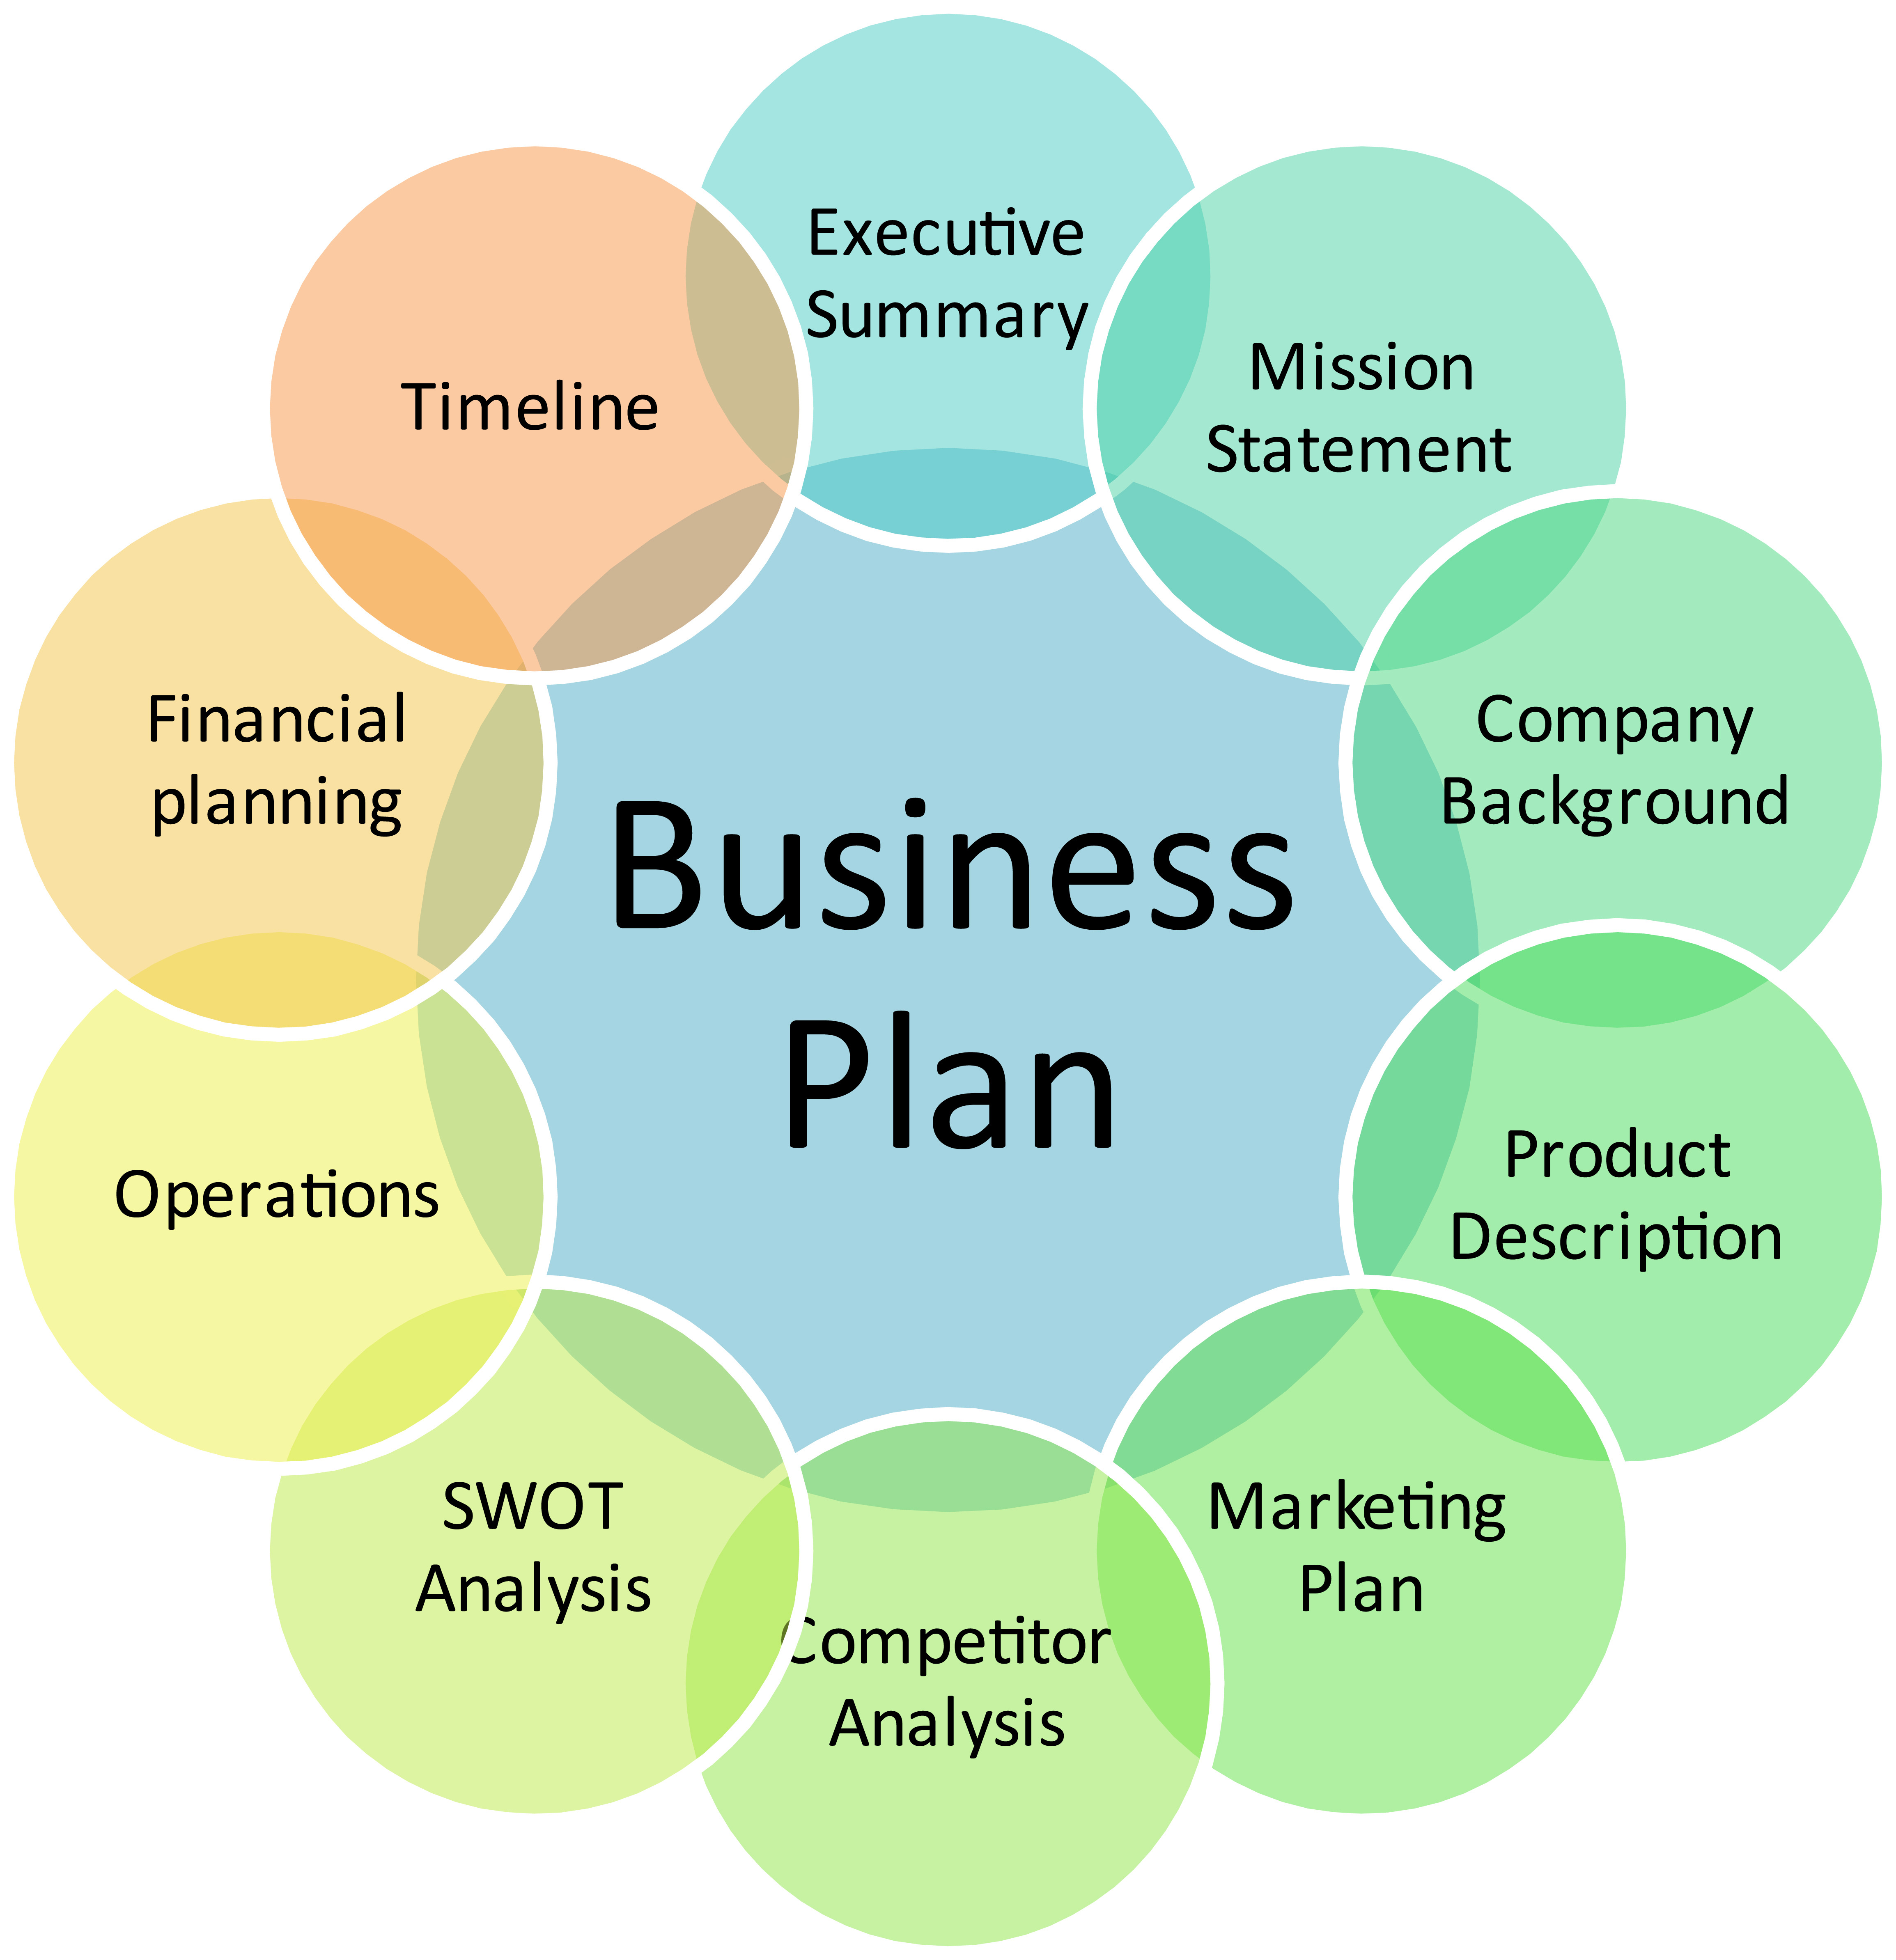 Business plan test questions